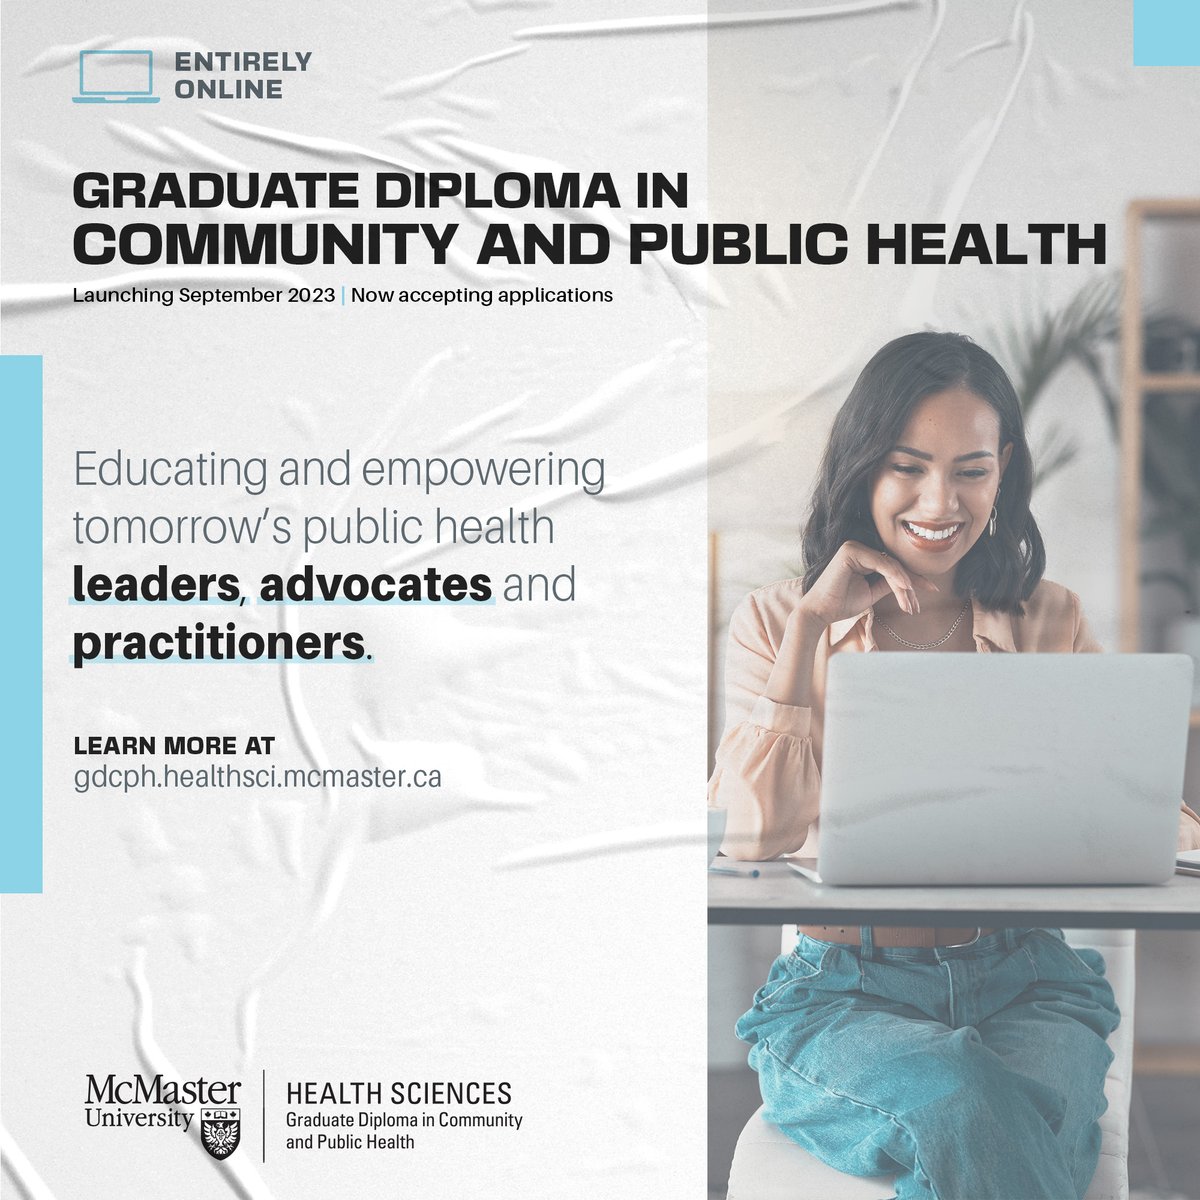 HEI today announced the launch of Canada's first part-time, online Graduate Diploma in Community and Public Health. More details here: bit.ly/3iKgmzk | #publichealth #BrighterWorld